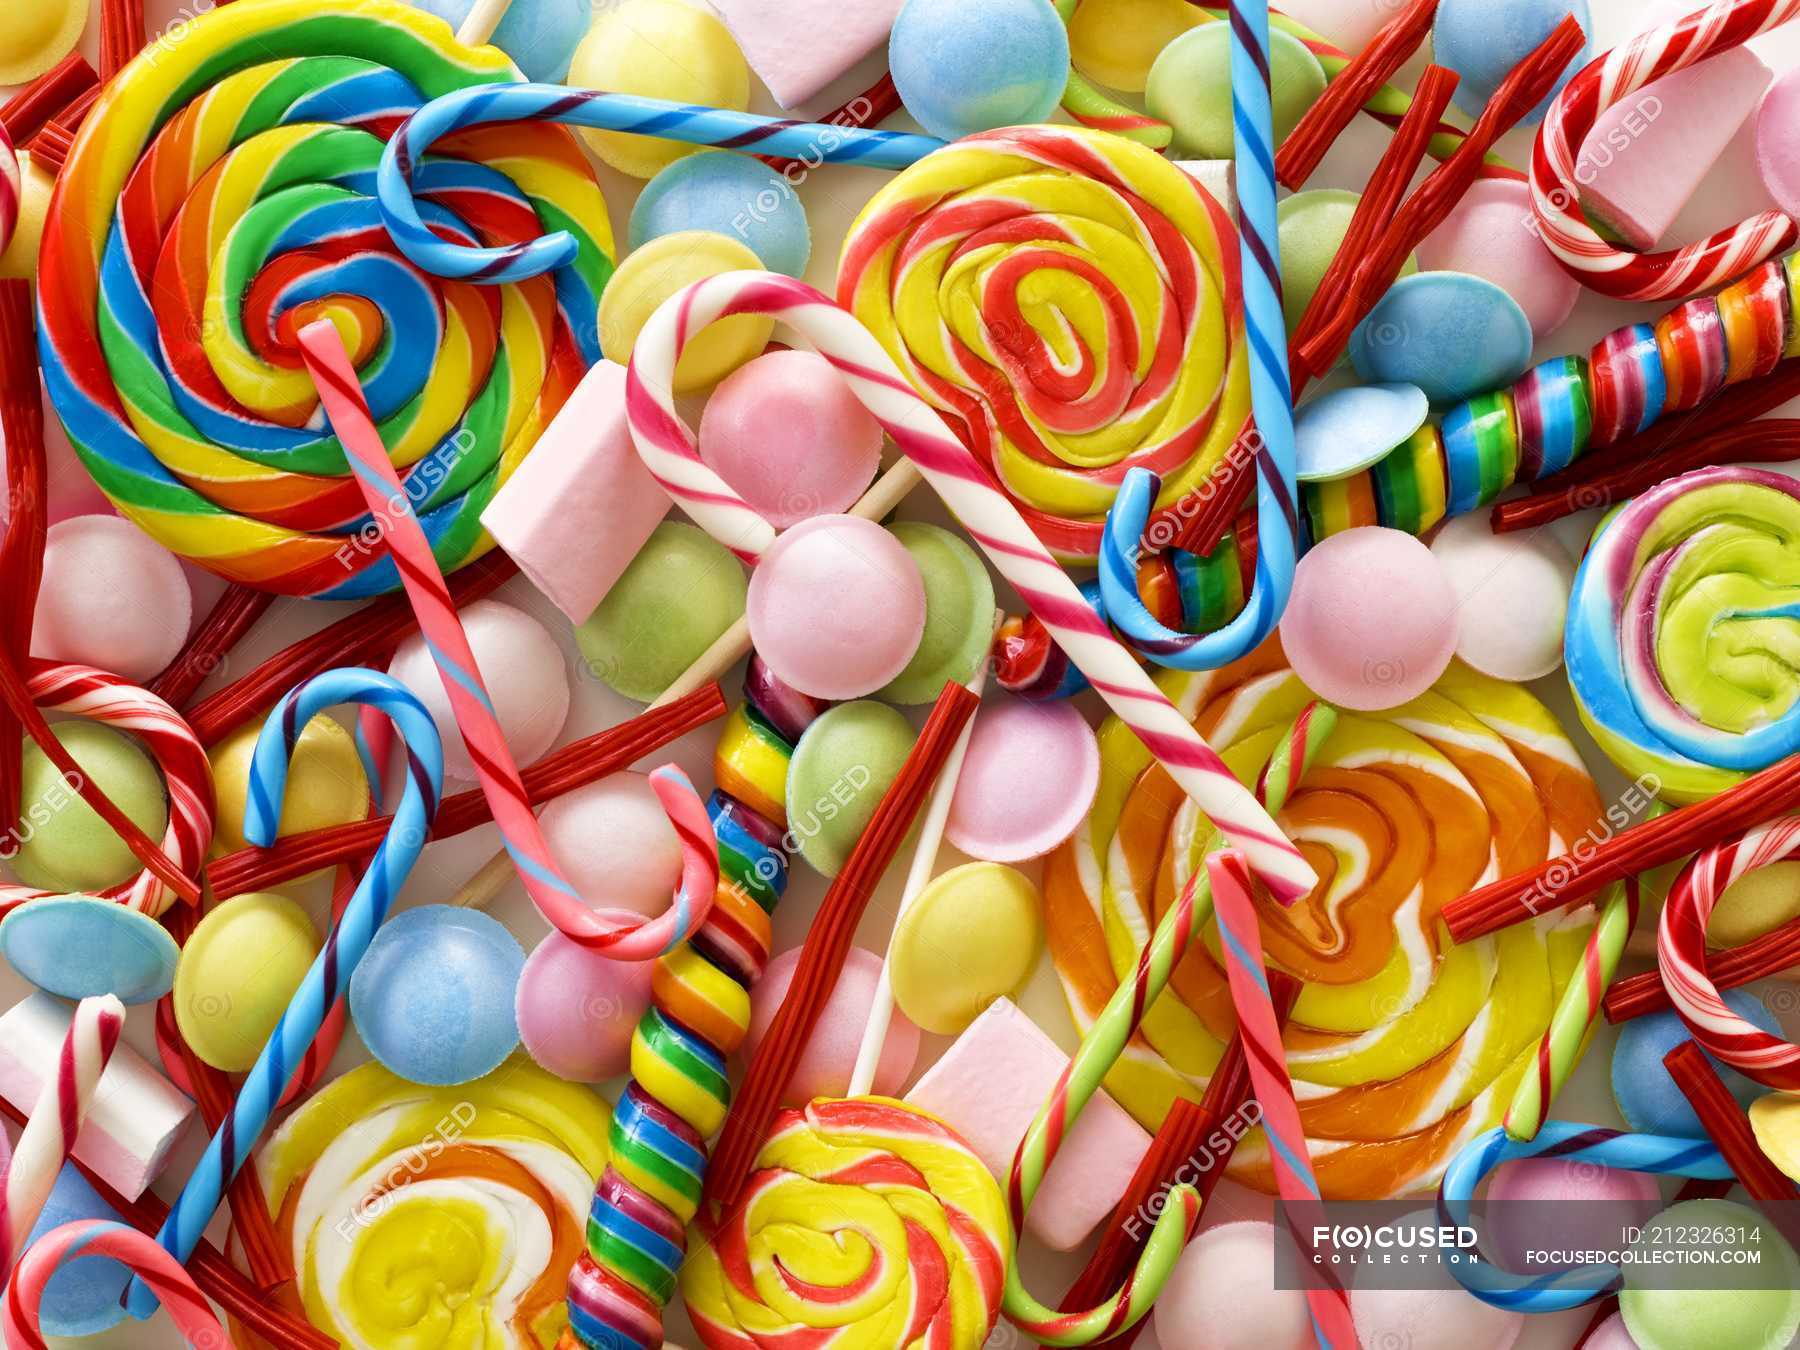 Isolator telescoop Mooie jurk Colorful sweets and candy canes, full frame. — arrangement, abundance -  Stock Photo | #212326314